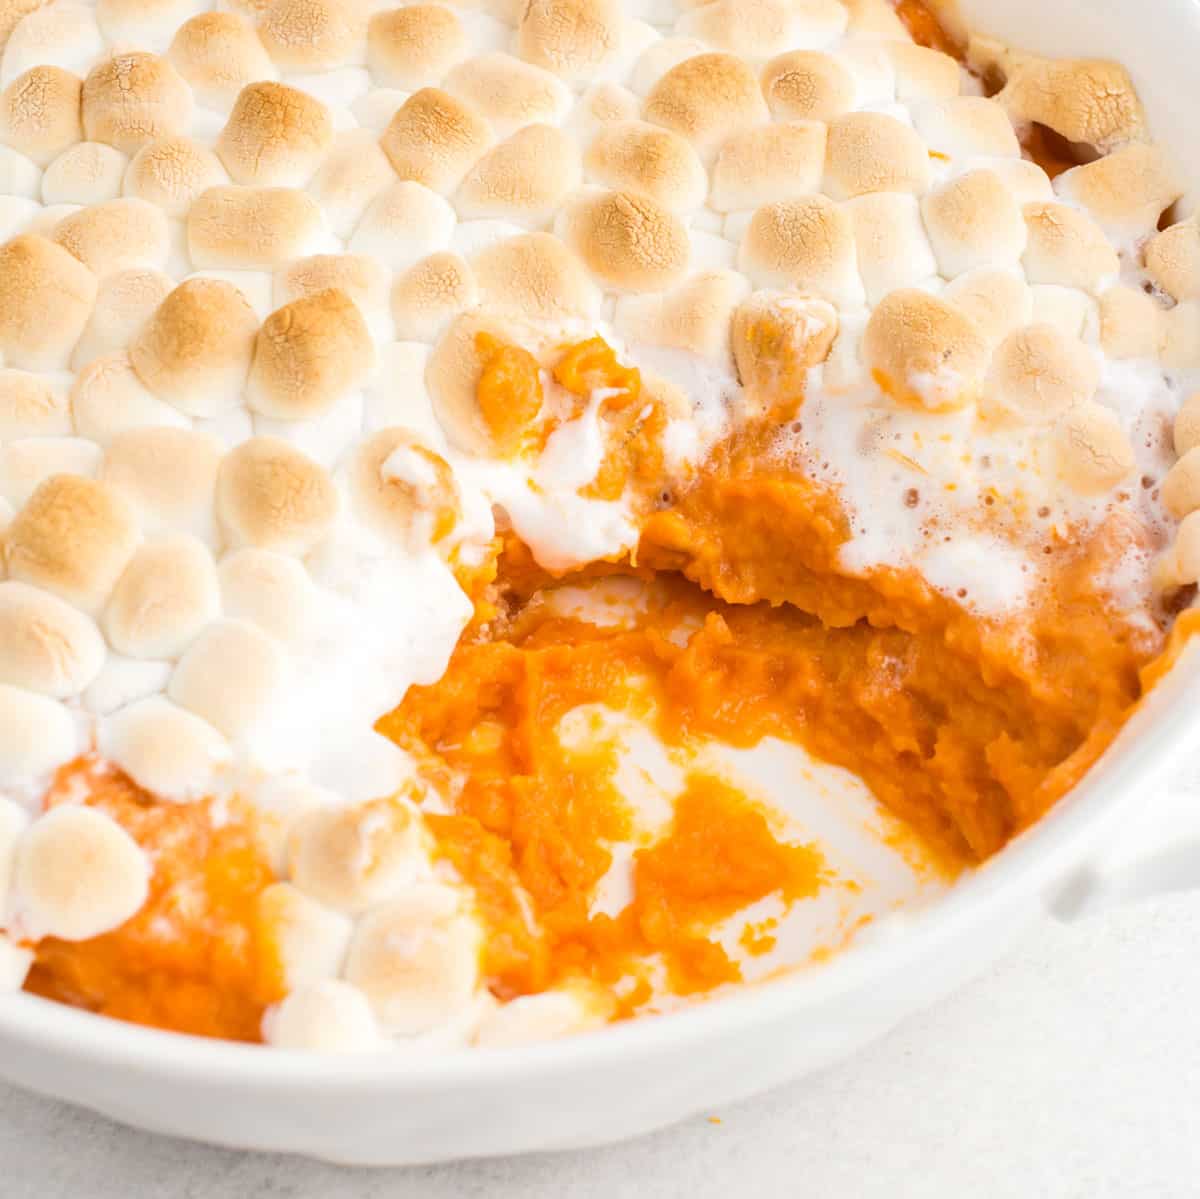 Candied Yams: with or without marshmallows